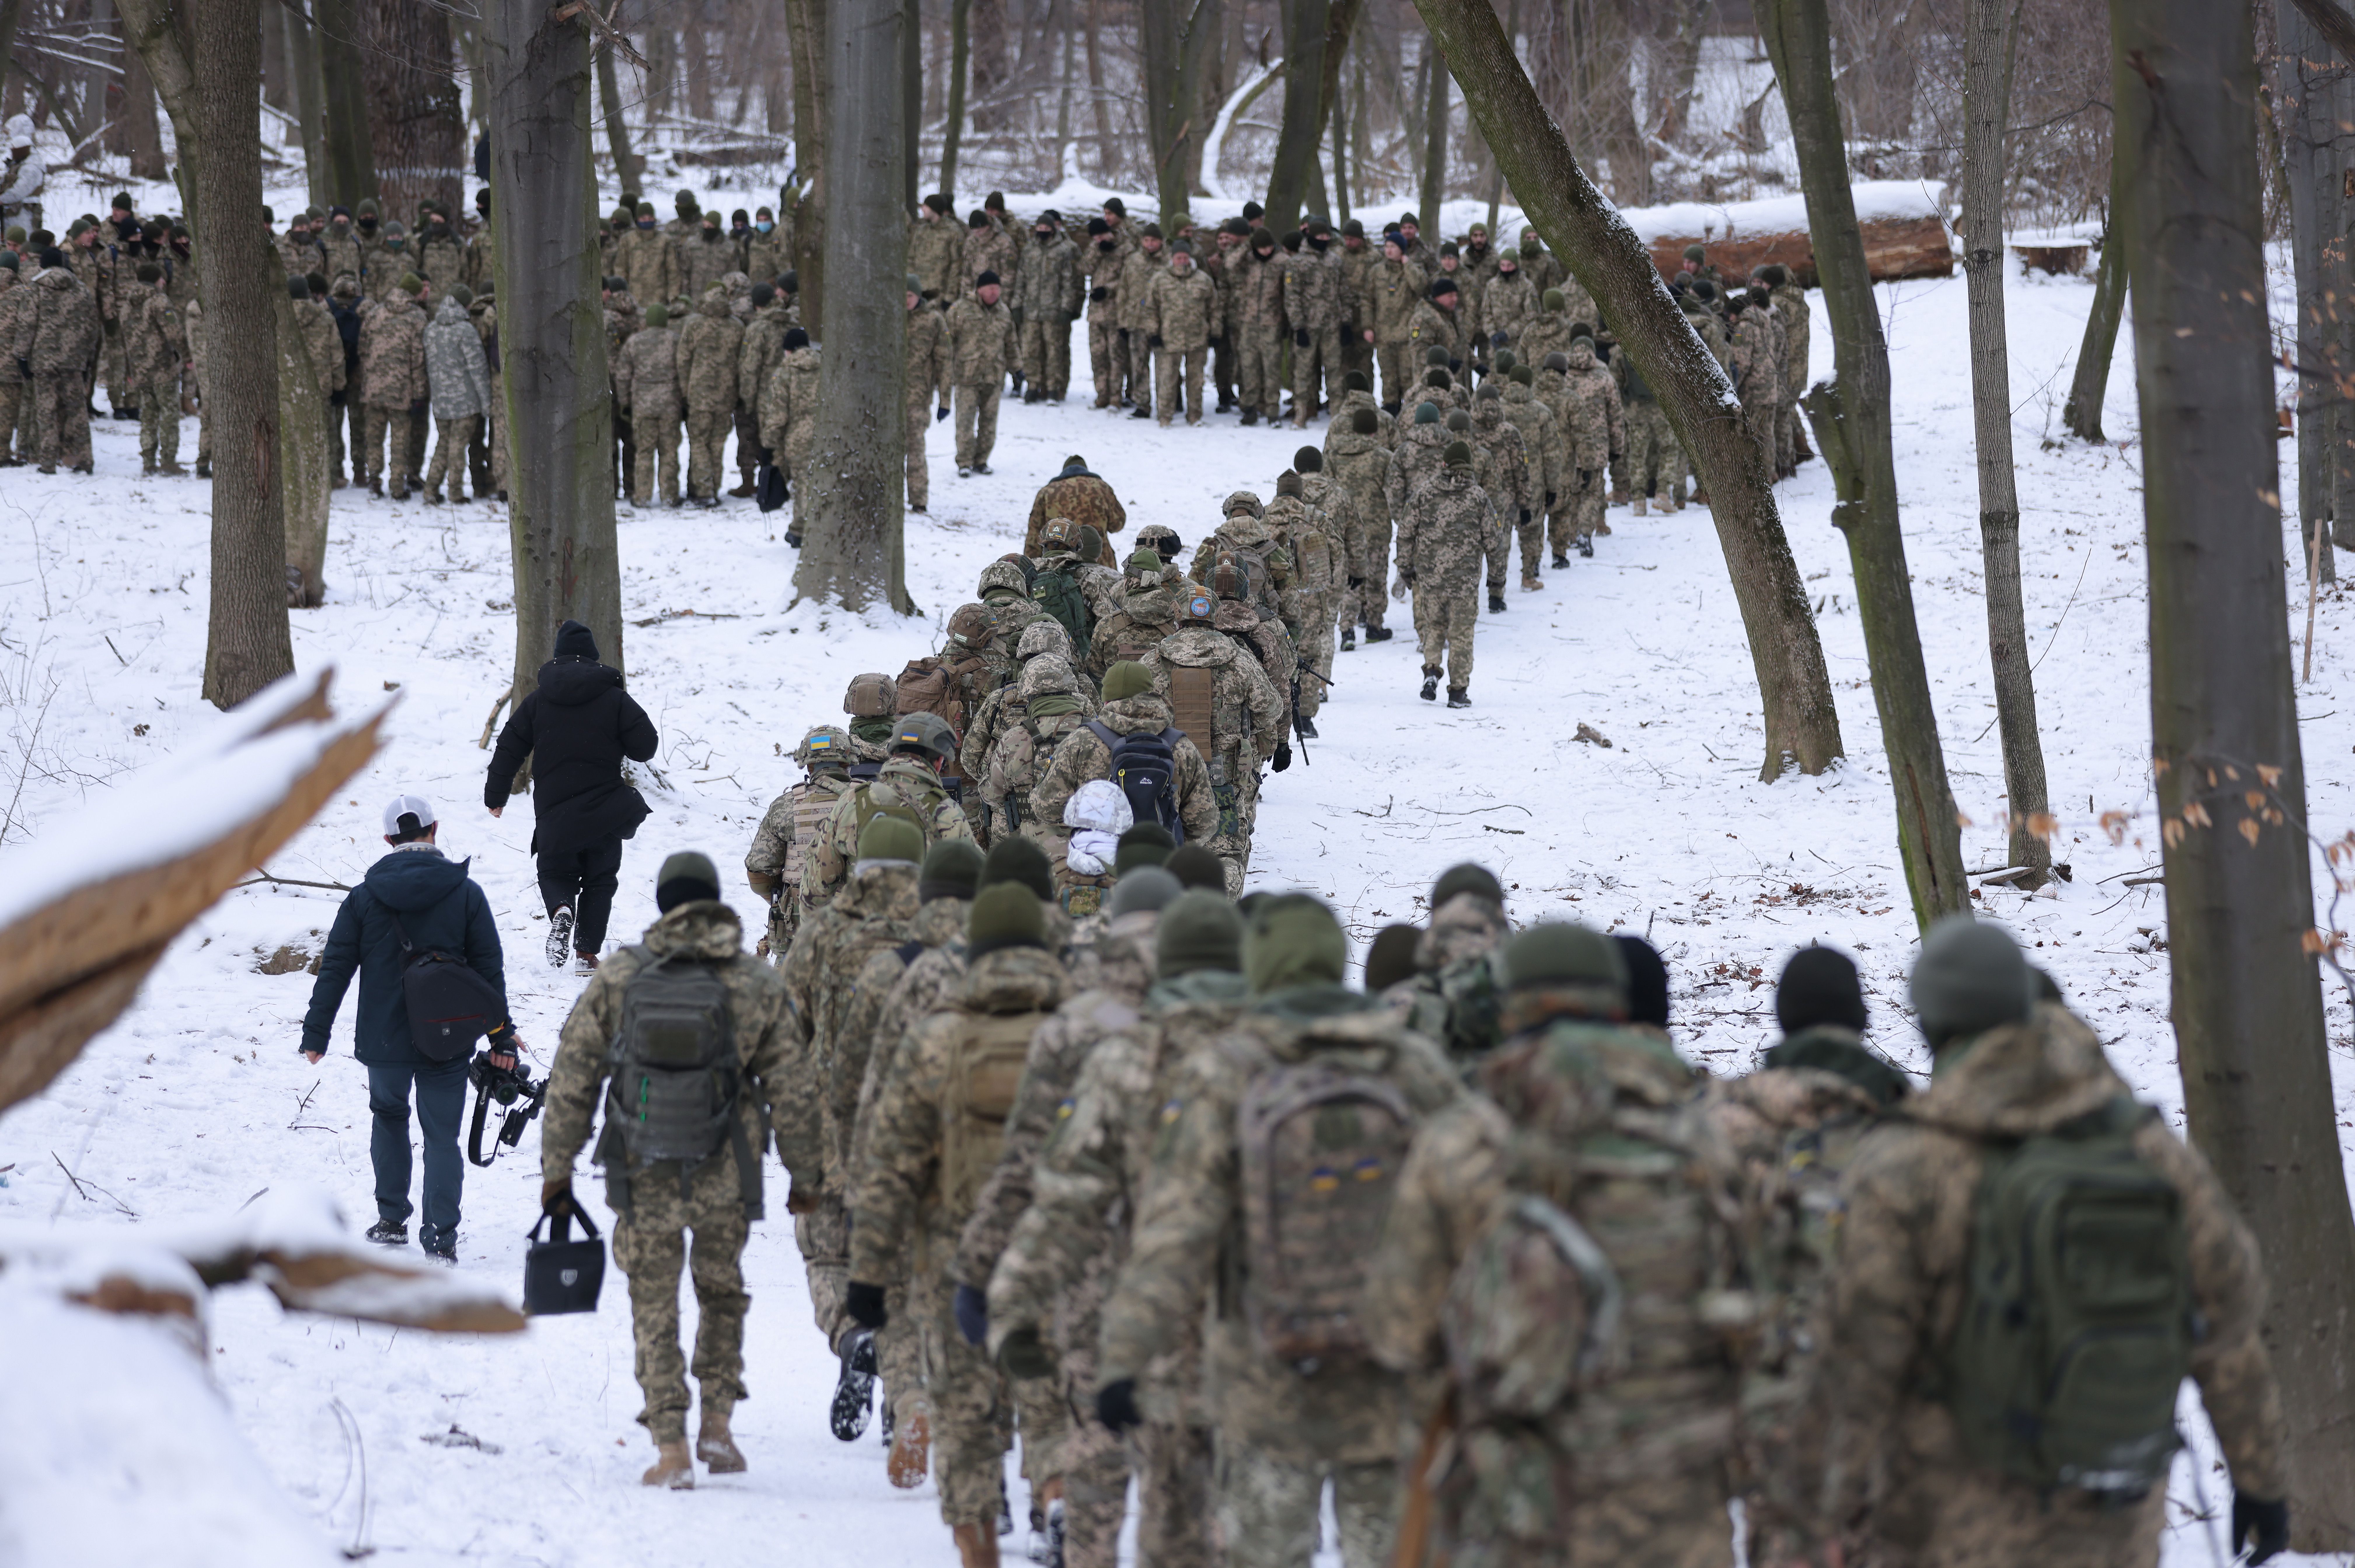 Civilian participants in a Kyiv Territorial Defence unit train on a Saturday in a forest on January 22, 2022 in Kyiv, Ukraine.